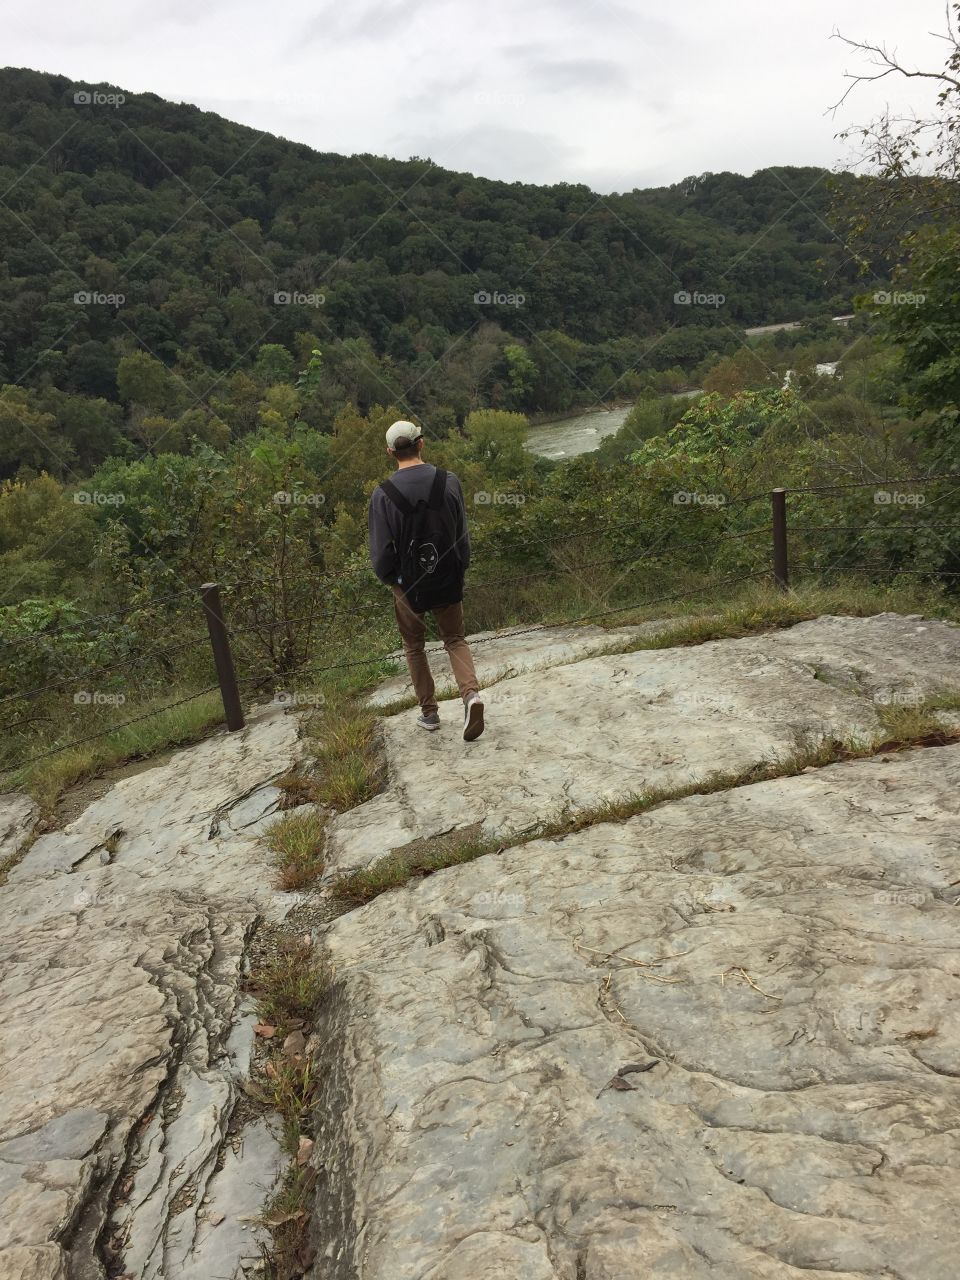 Harper’s Ferry historic hike and scenic views. 